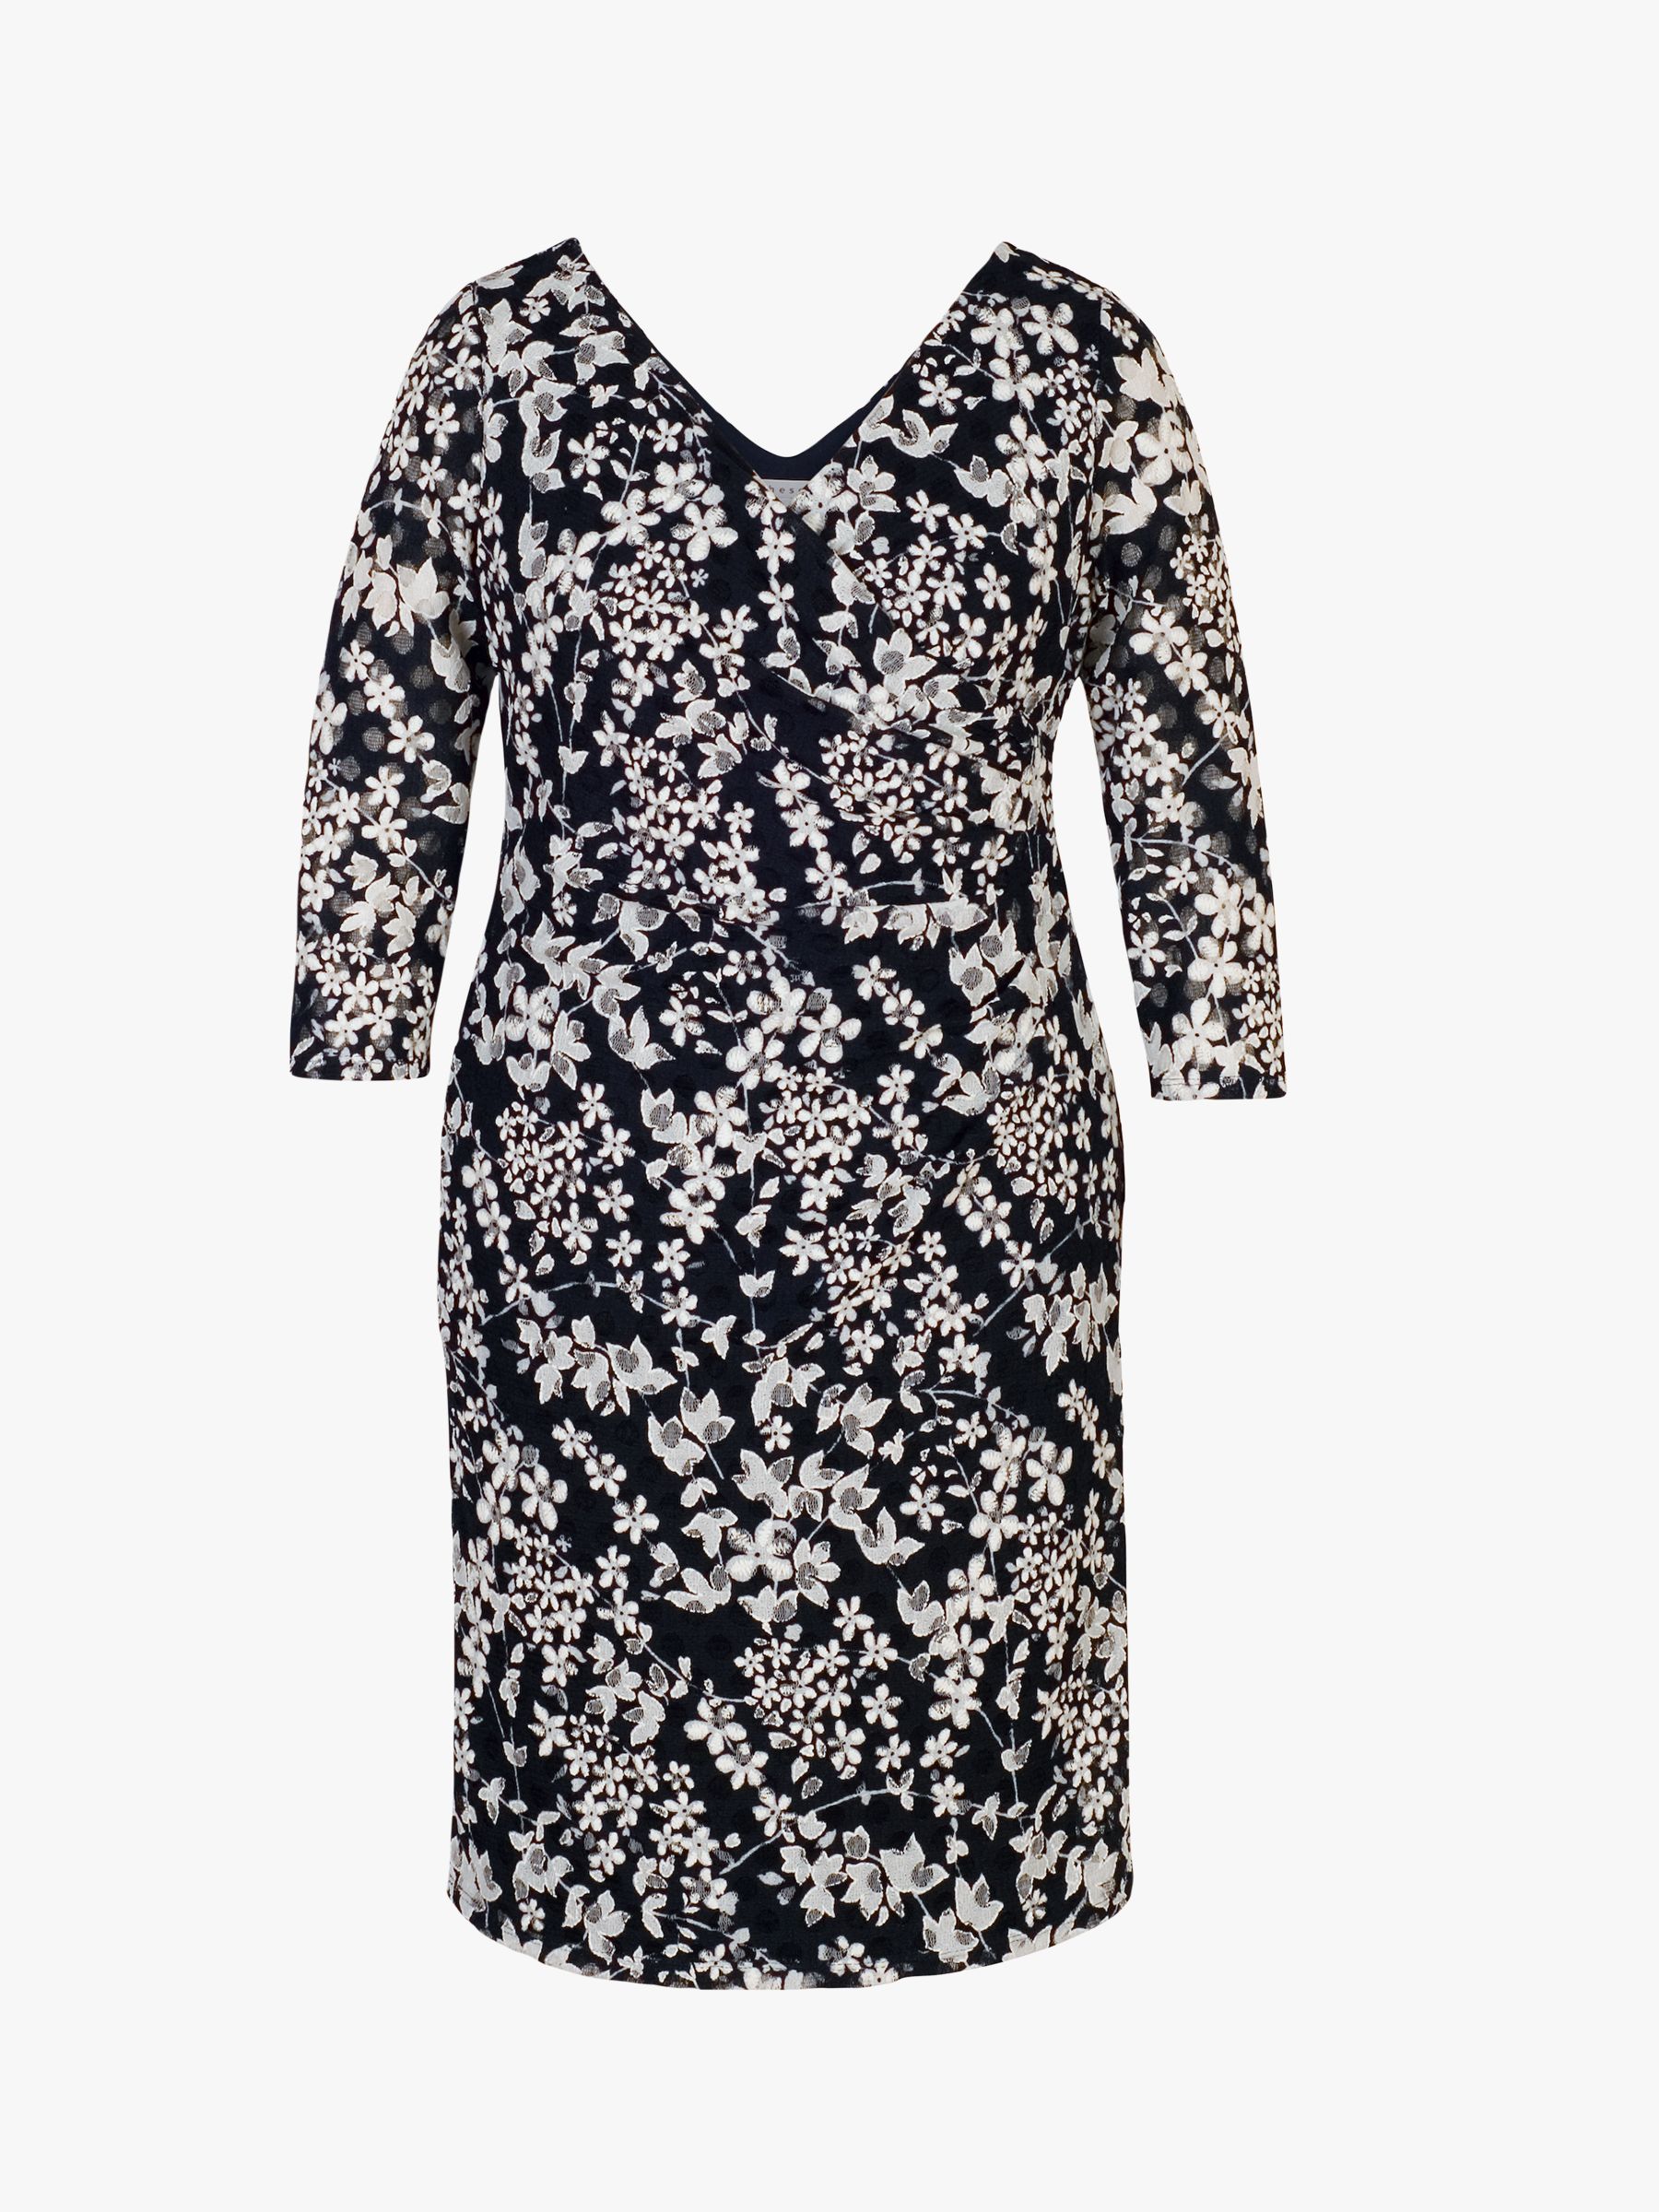 Buy chesca Floral Midi Dress, Navy/White Online at johnlewis.com